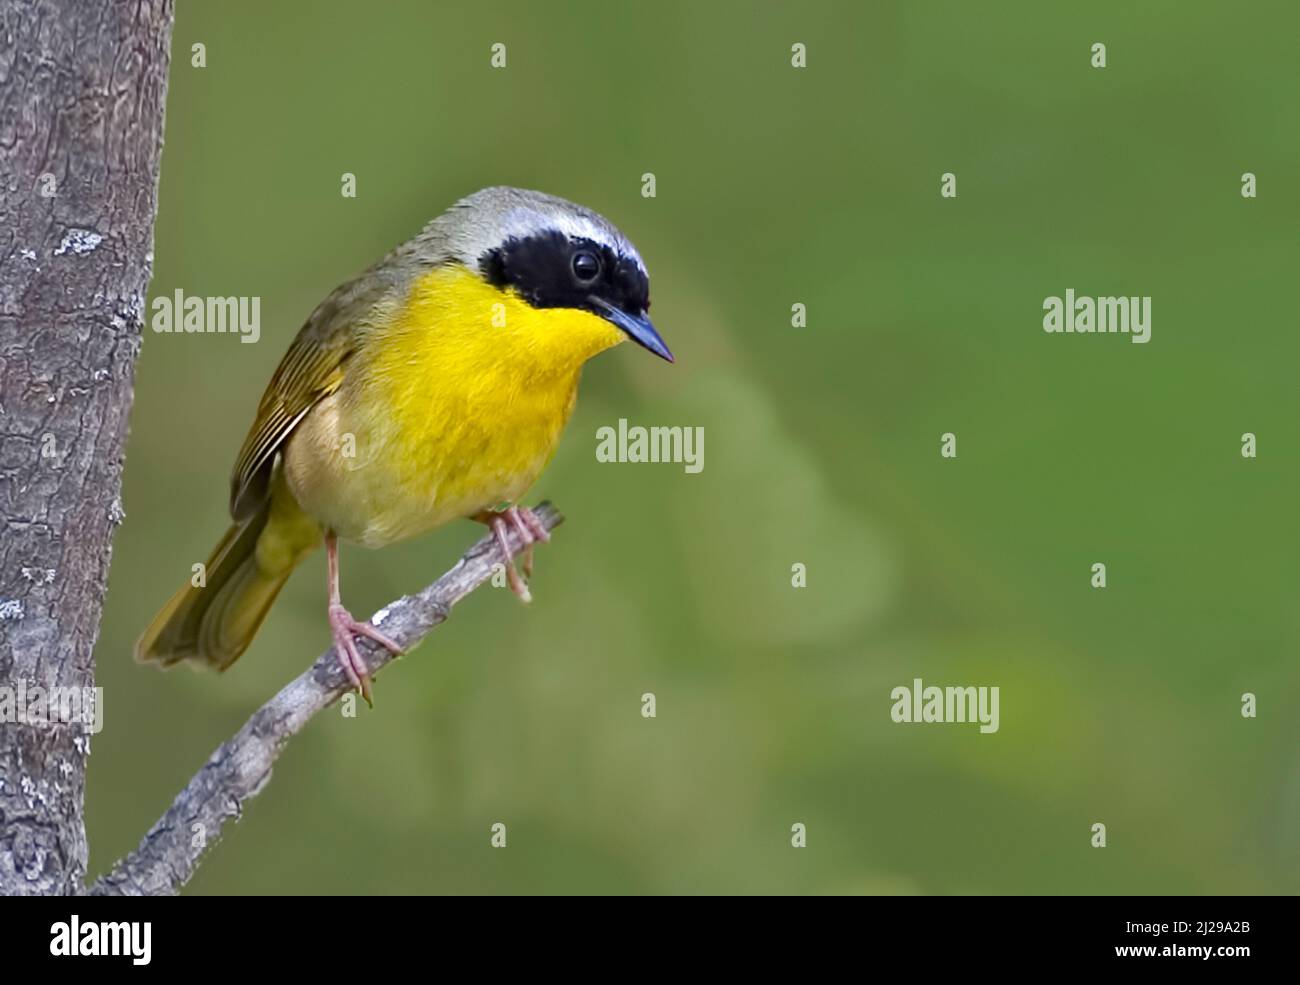 A Close up of a Common Yellowthroat, Geothlypis trichas Stock Photo